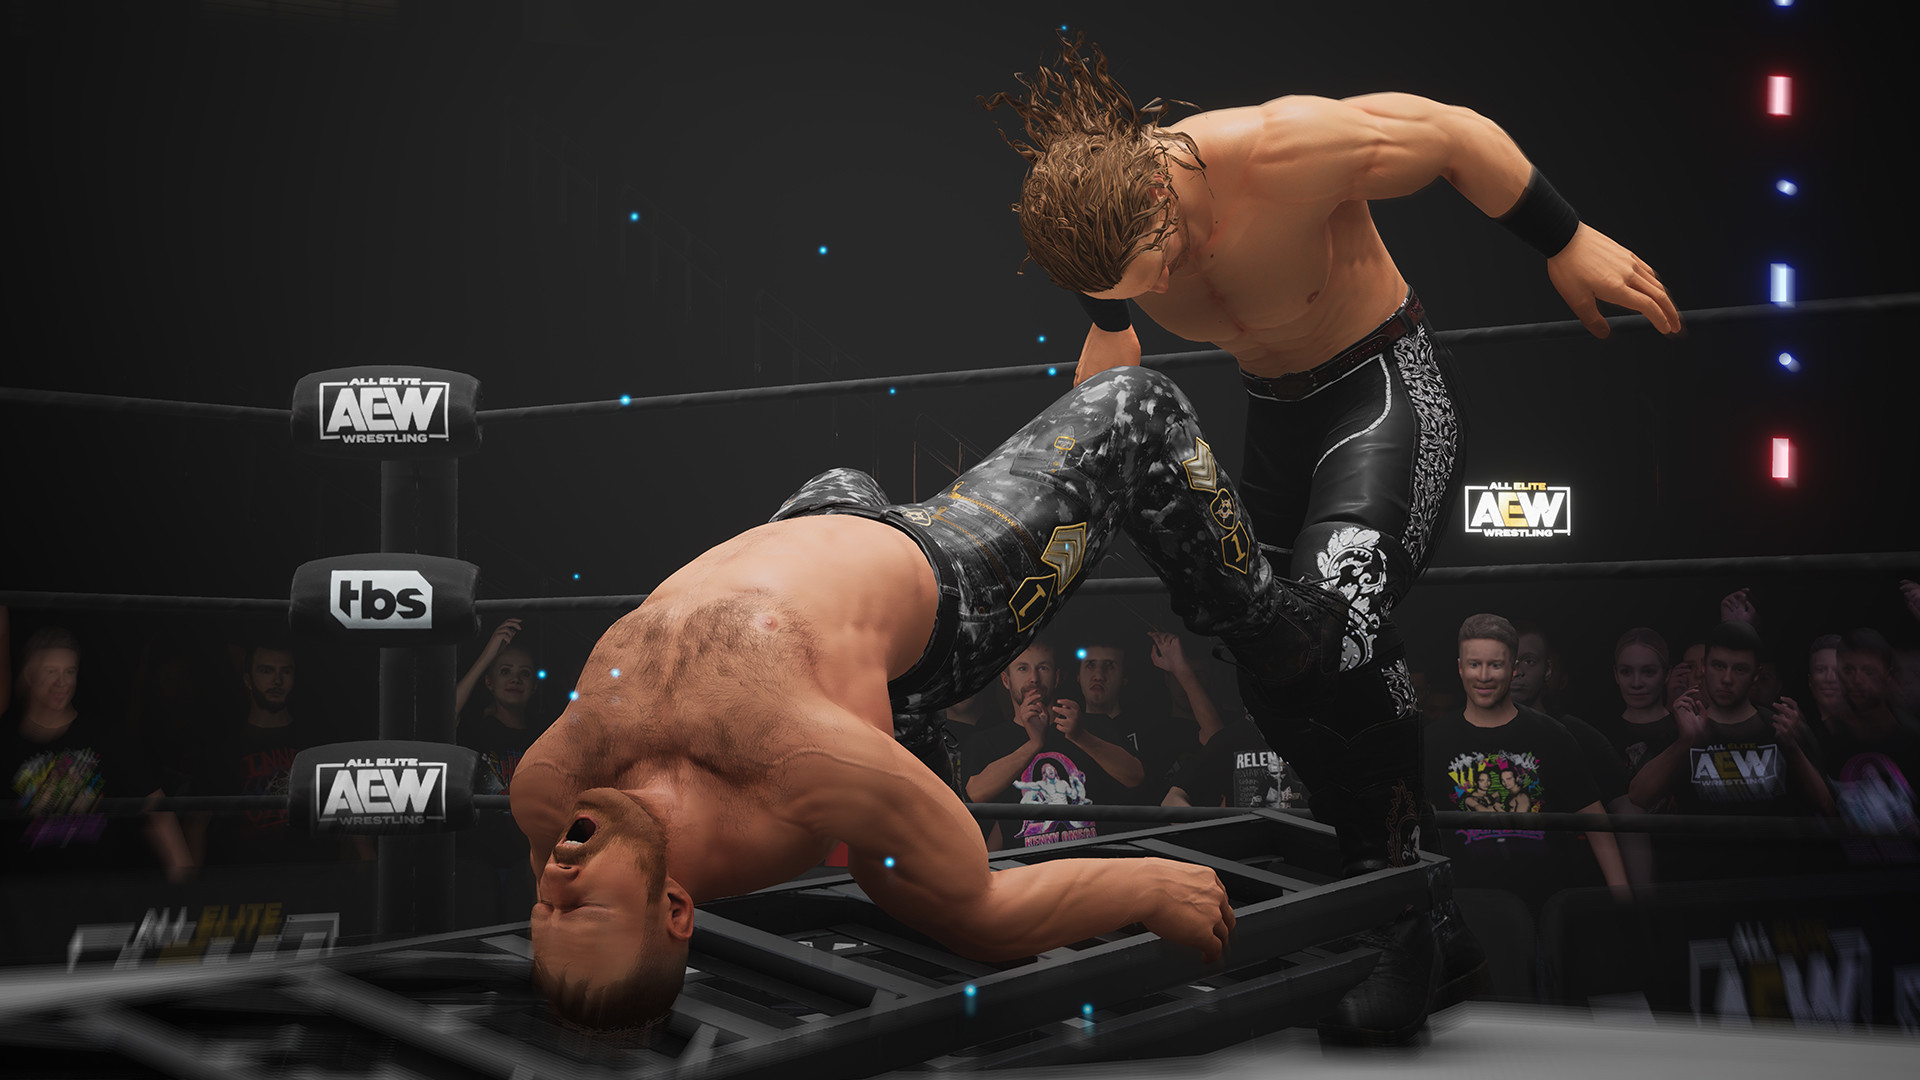 AEW: Fight Forever XBOX One / Xbox Series X,S Account